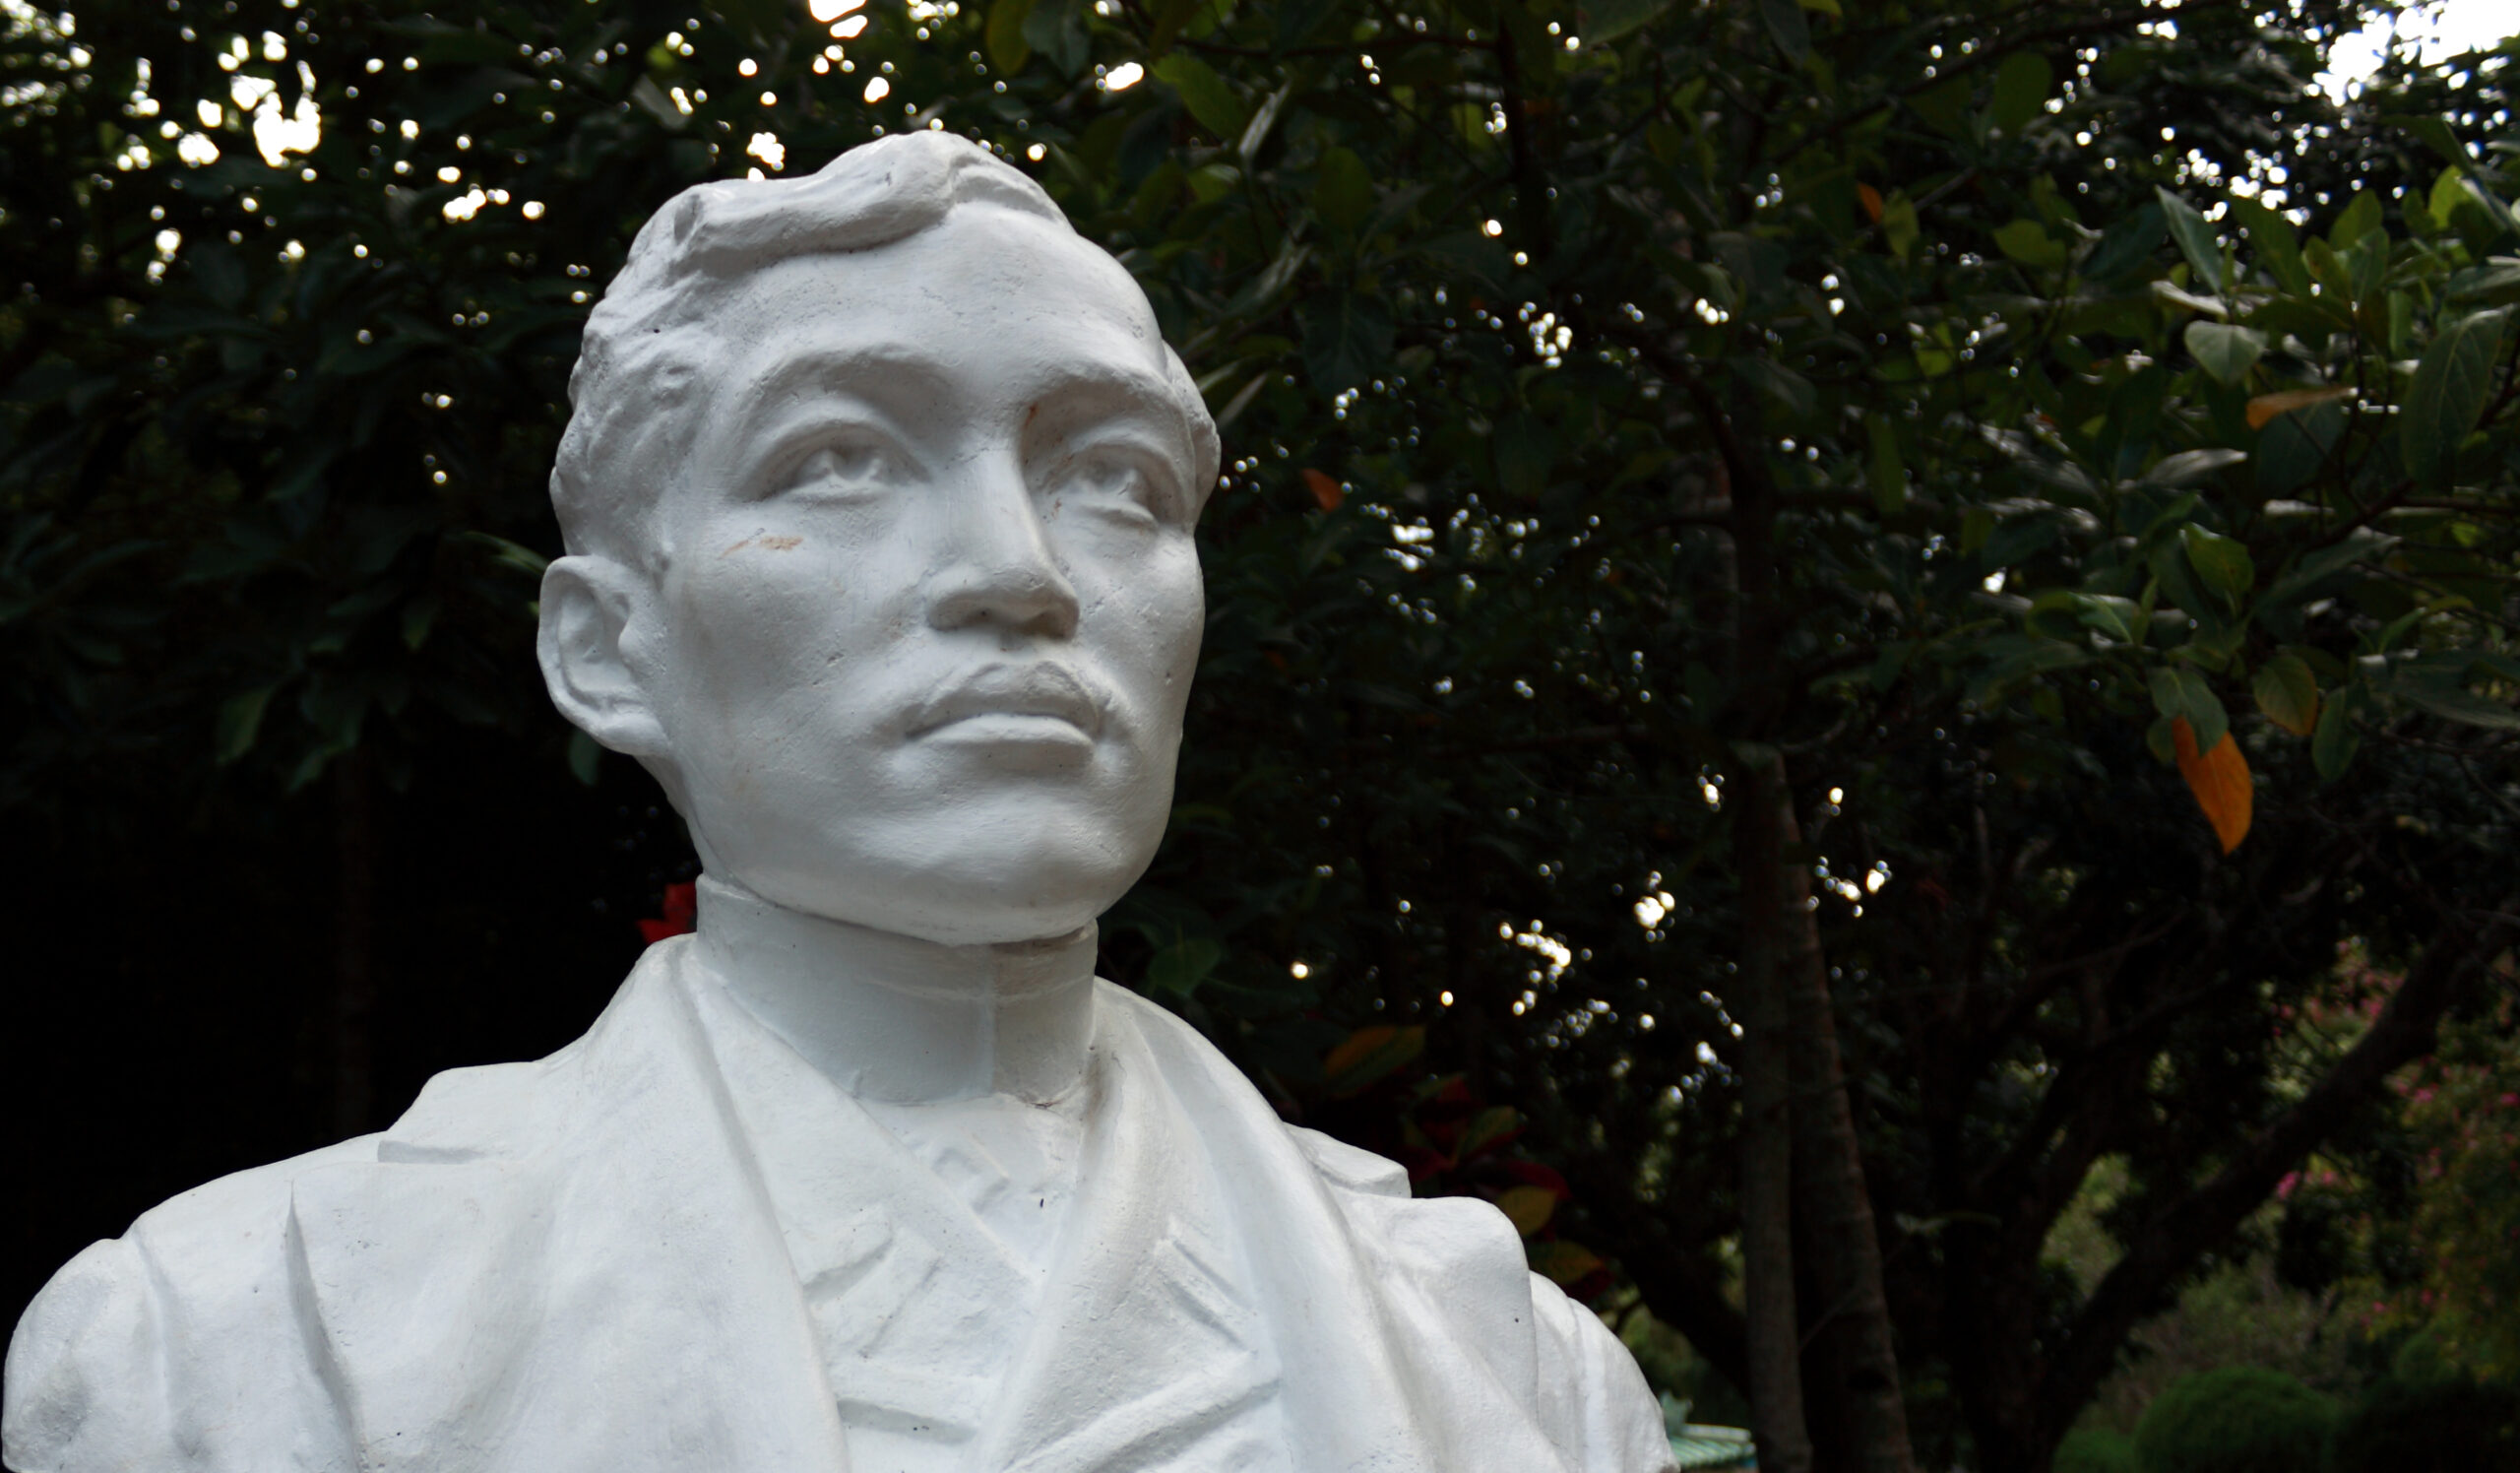 A photo of a white statue of a man with a focused expression glancing up outside with some tree branches in the background.